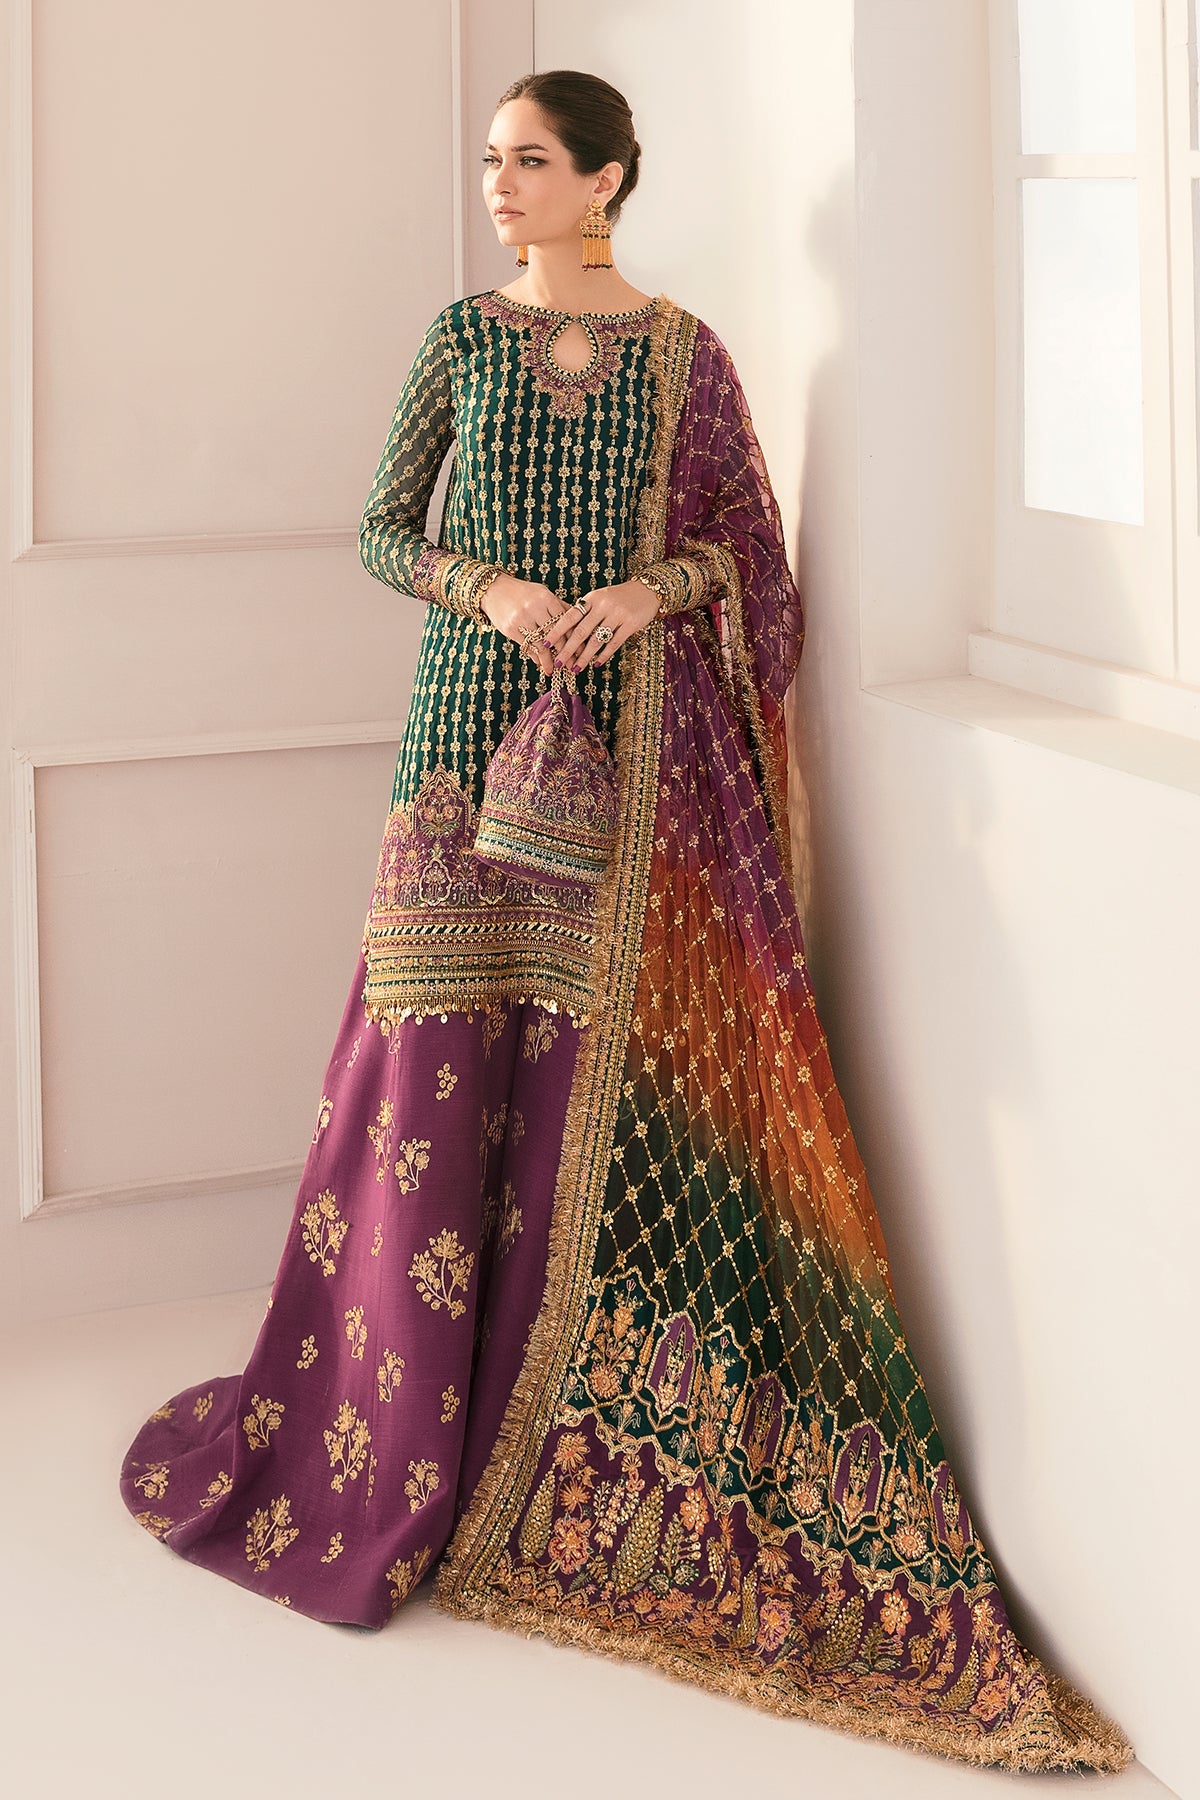 CH11-D06 - Chantelle Embroidered Collection Chapter 11 by Baroque Fashion - Shahana Collection UK